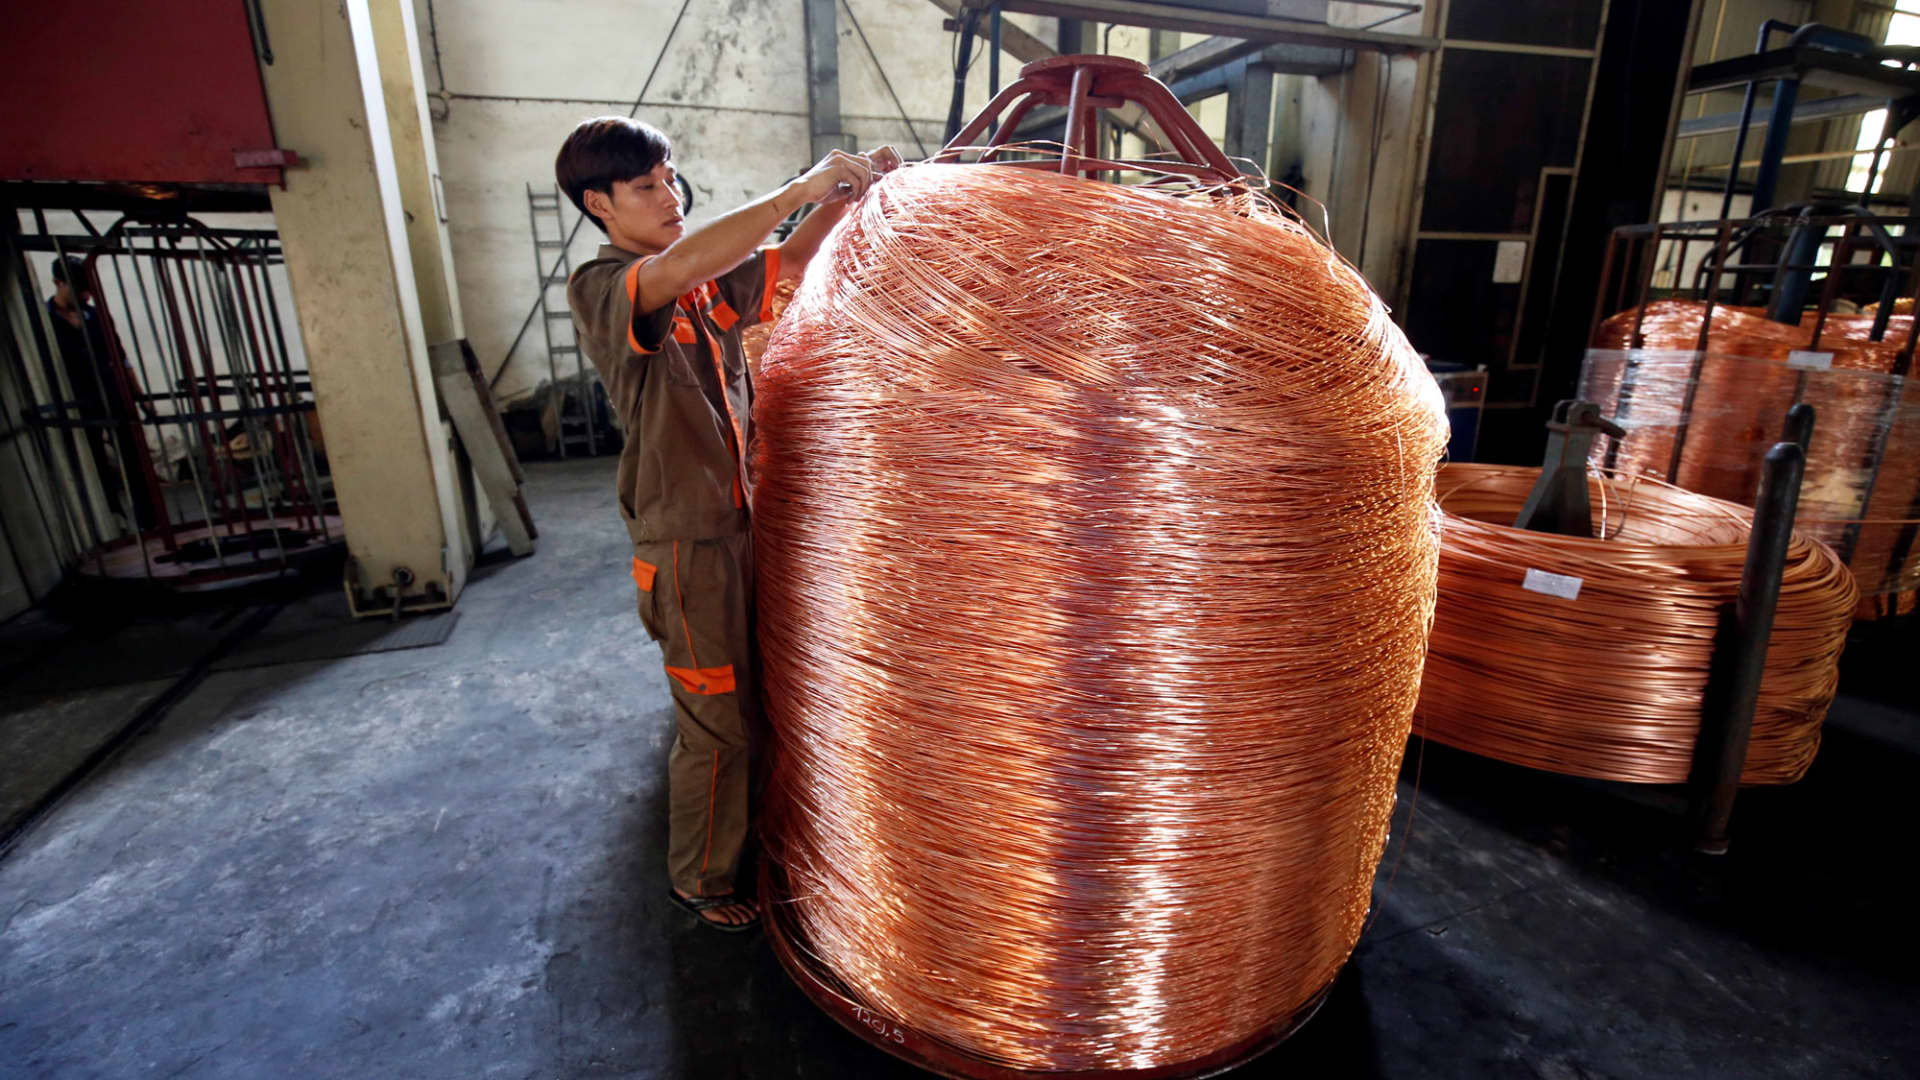 Copper is key to electric vehicles, wind and solar power. We're short supply